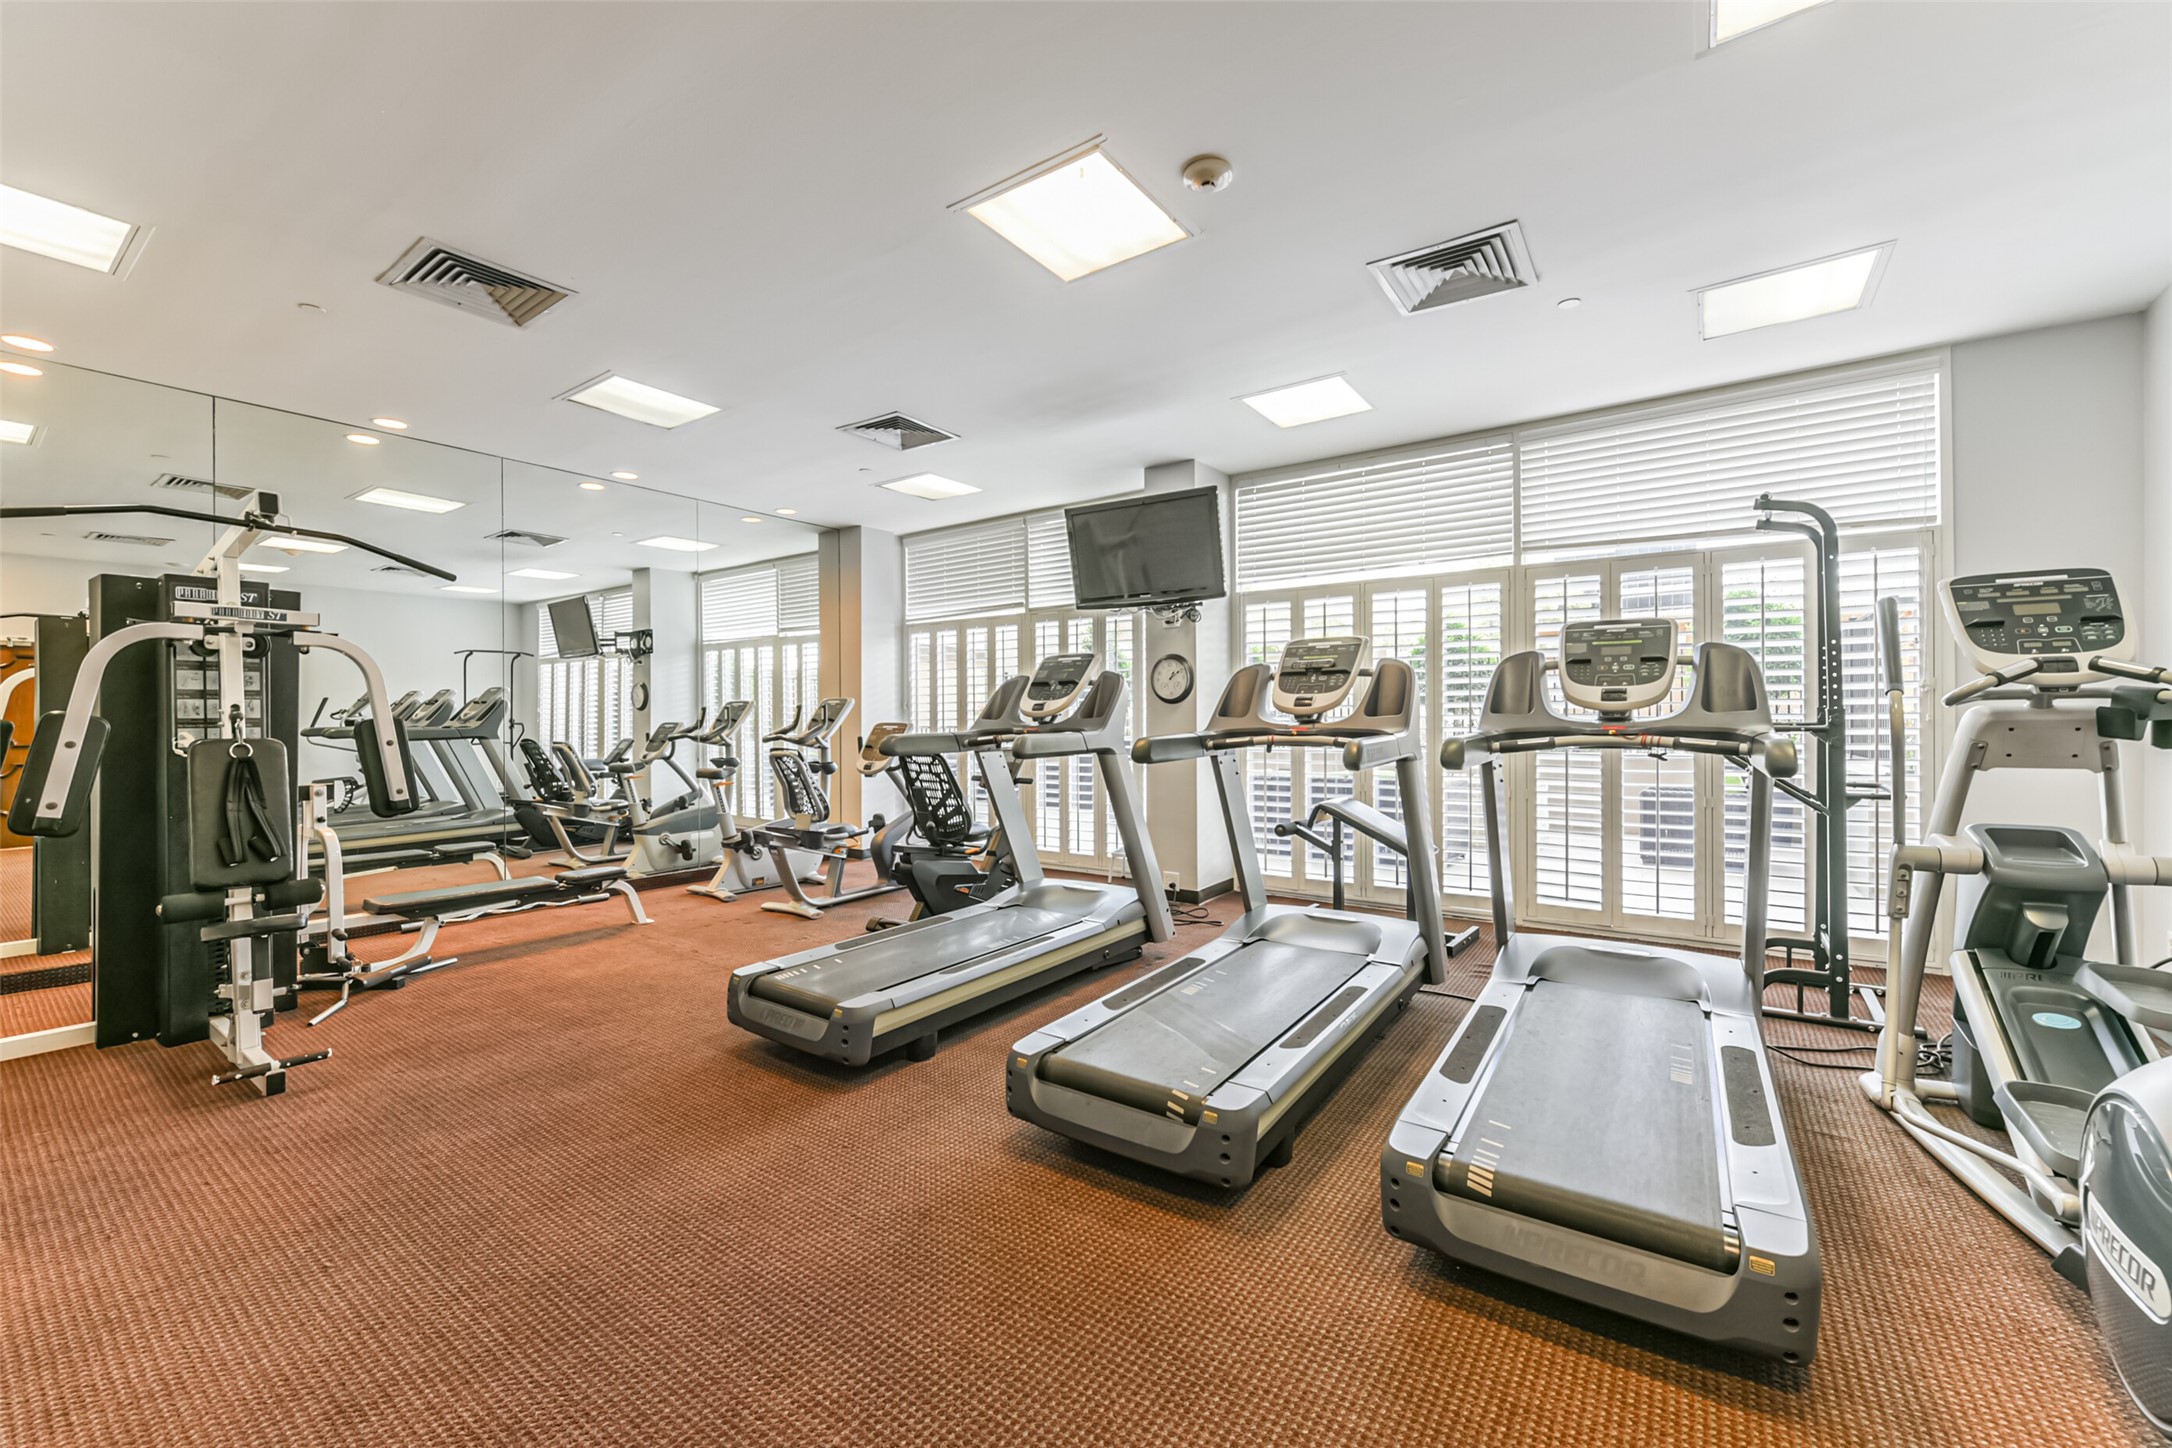 Another building amenity - On-site 24-hour fitness center